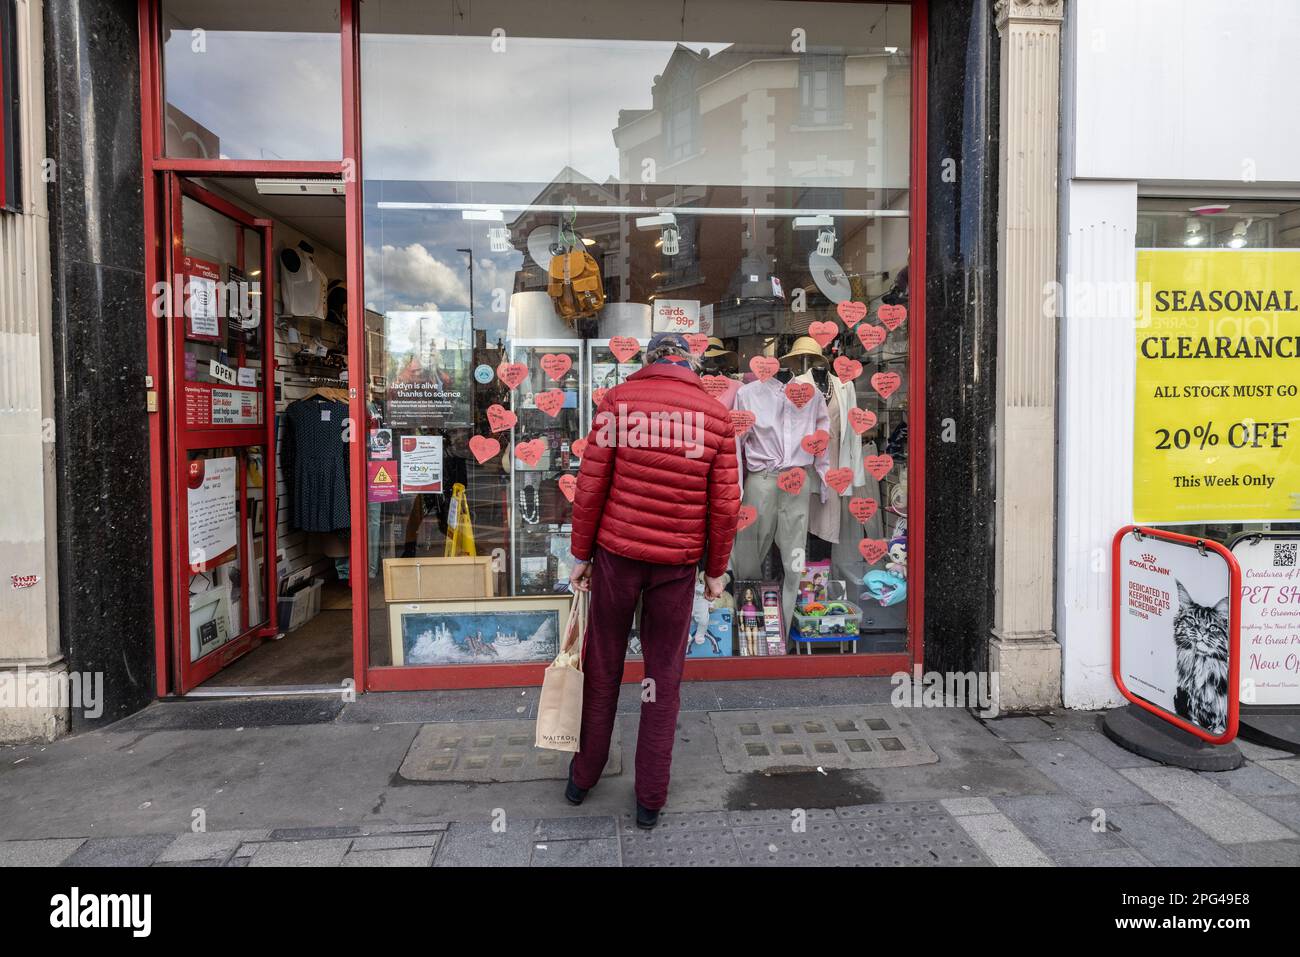 A man wearing a red jacket looks into the front display of a charity shop window, situated on Putney High Street, southwest London, England, UK Stock Photo